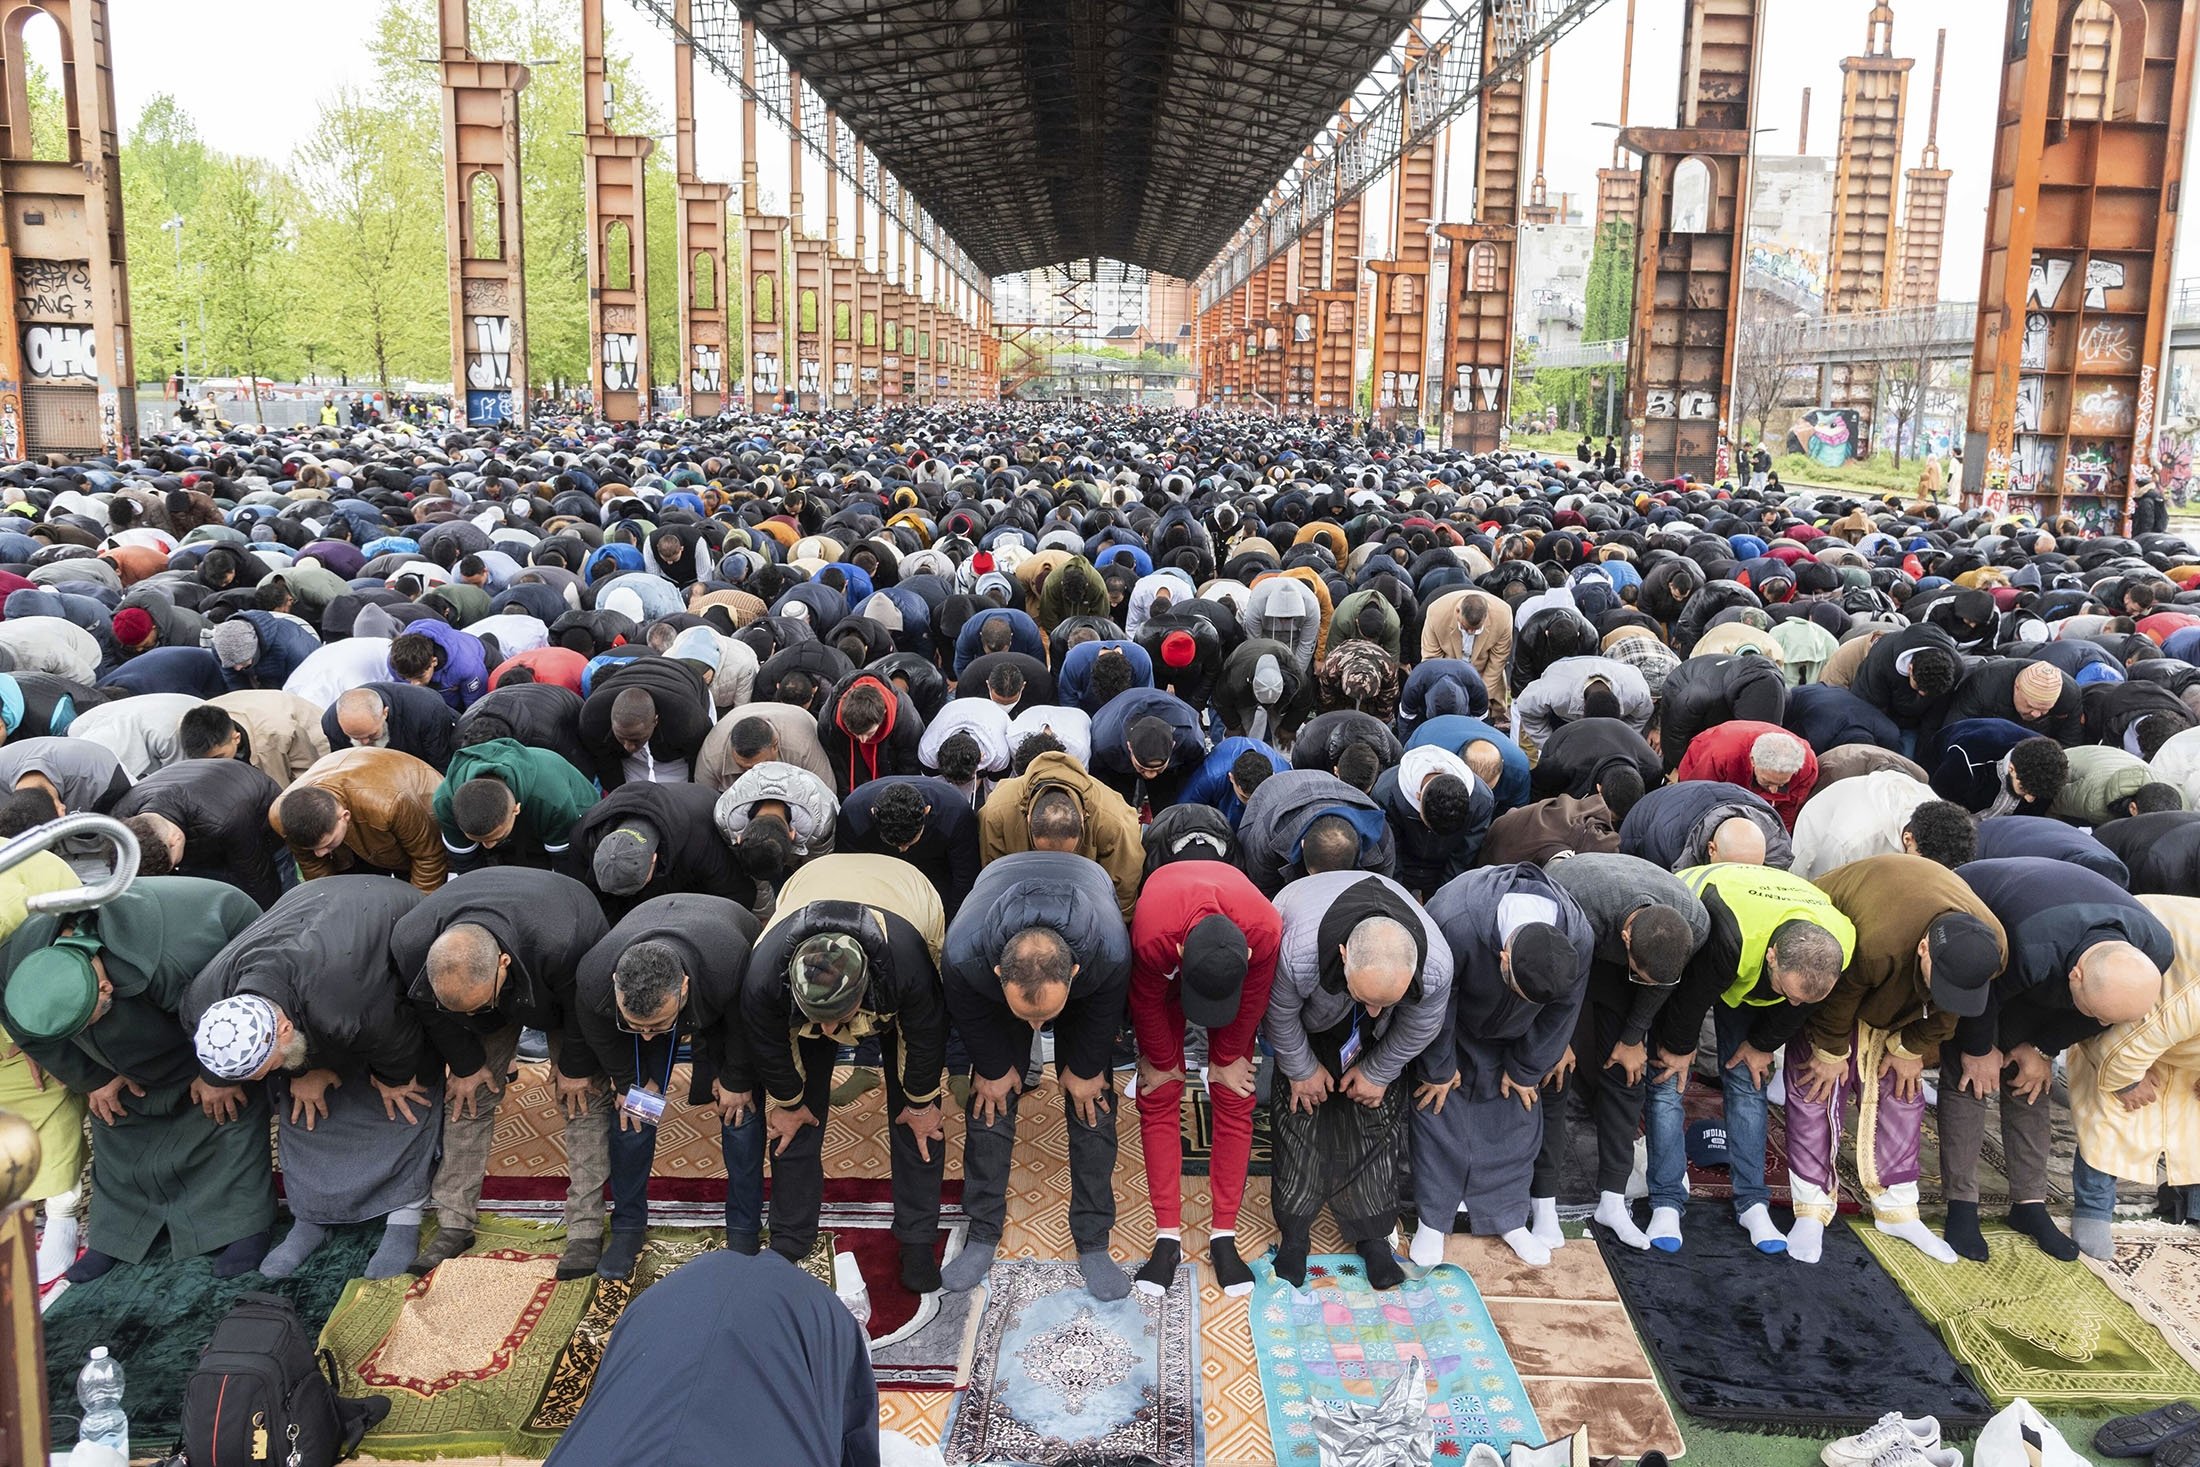 The faithful attend the final prayer of Eid al-Fitr, marking the end of Ramadan, at the Dora Park in Turin, Italy, April 21, 2023. (AP Photo)